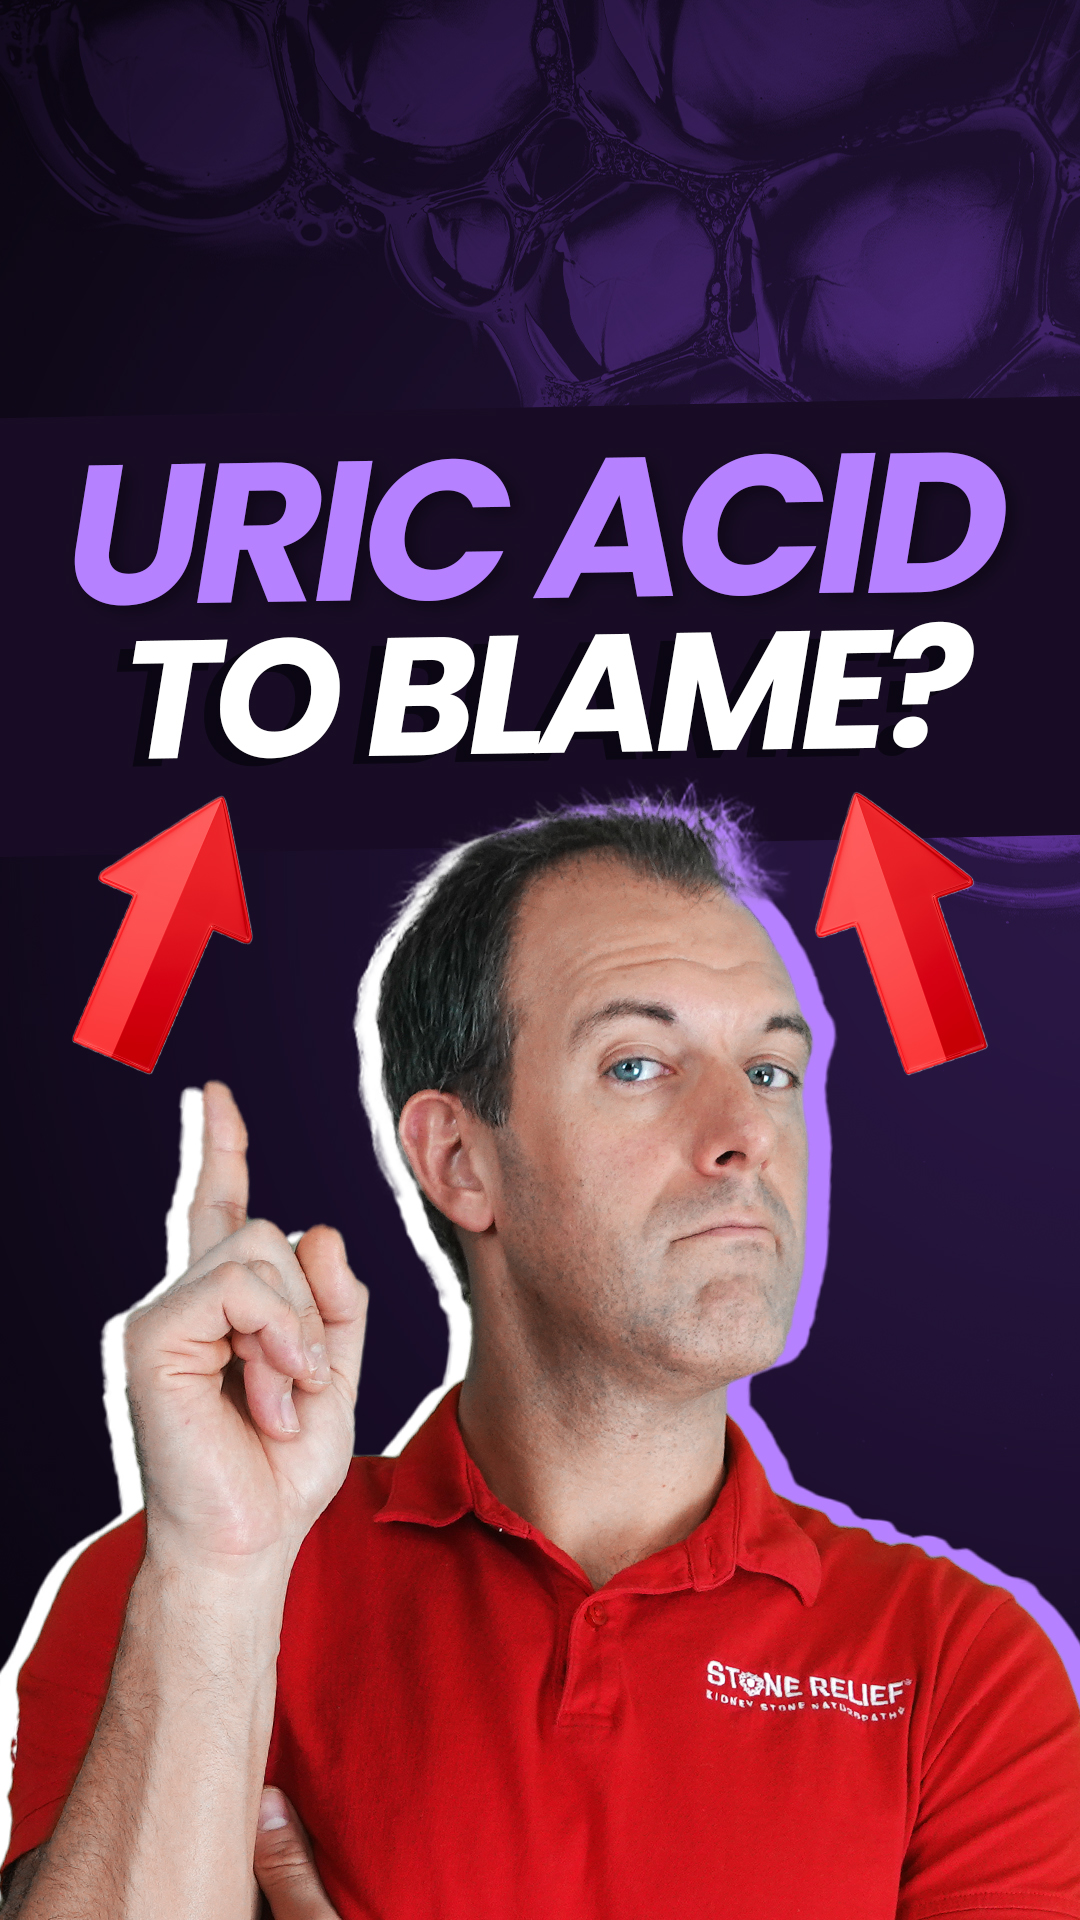 Is uric acid to blame for your kidney stone?